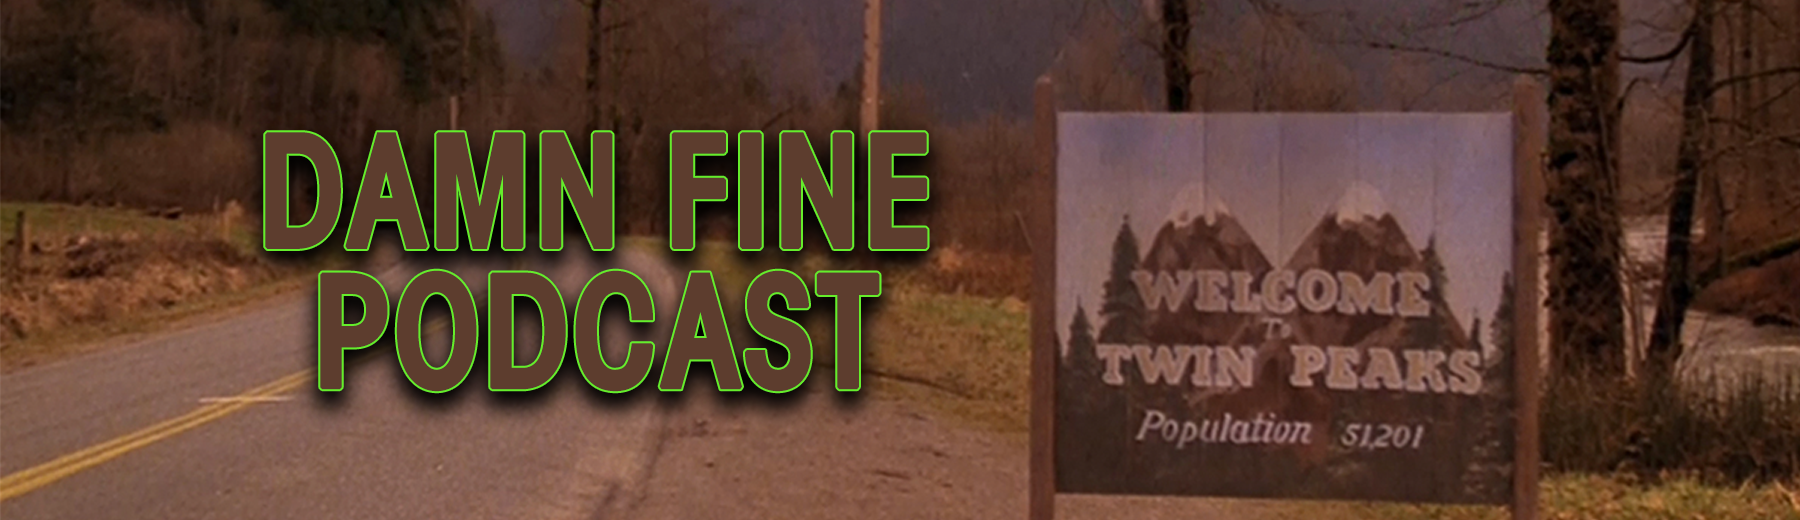 Damn Fine Podcast - A Twin Peaks Podcast